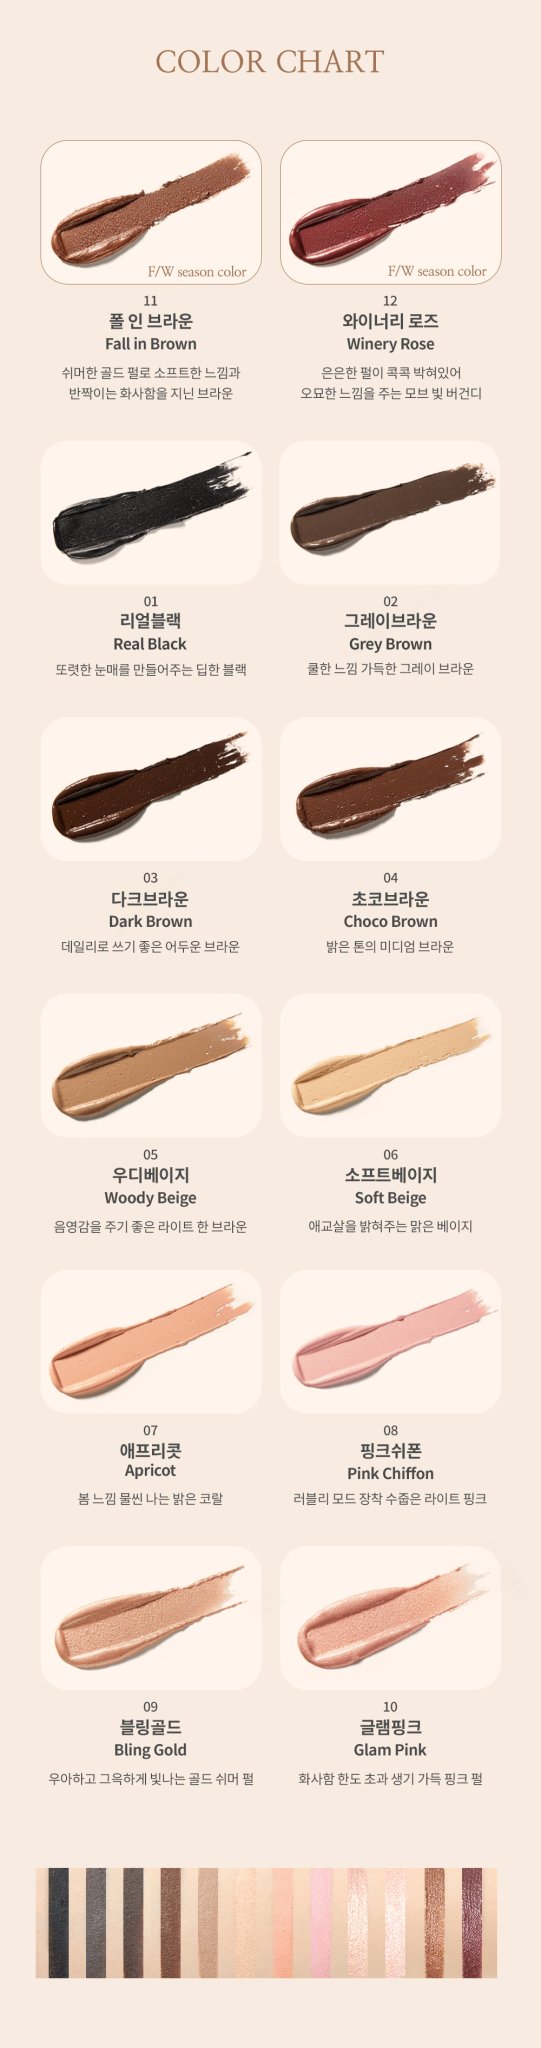 Botanical Color Mood Auto Pencil Liner 11 Fall In Brown - Nature Republic